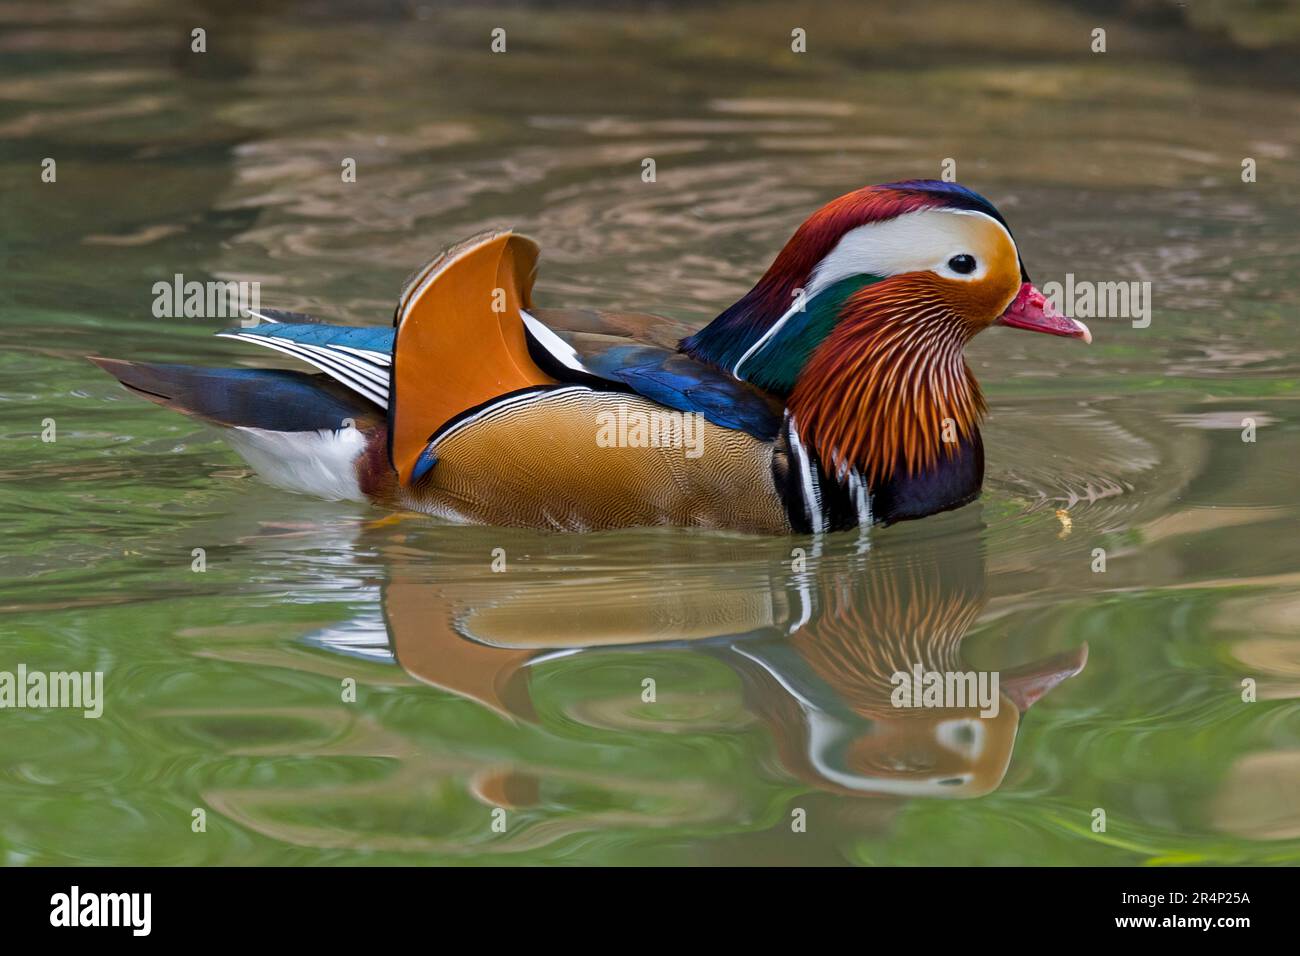 Mandarin duck (Aix galericulata) male swimming in pond, native to East Asia Stock Photo